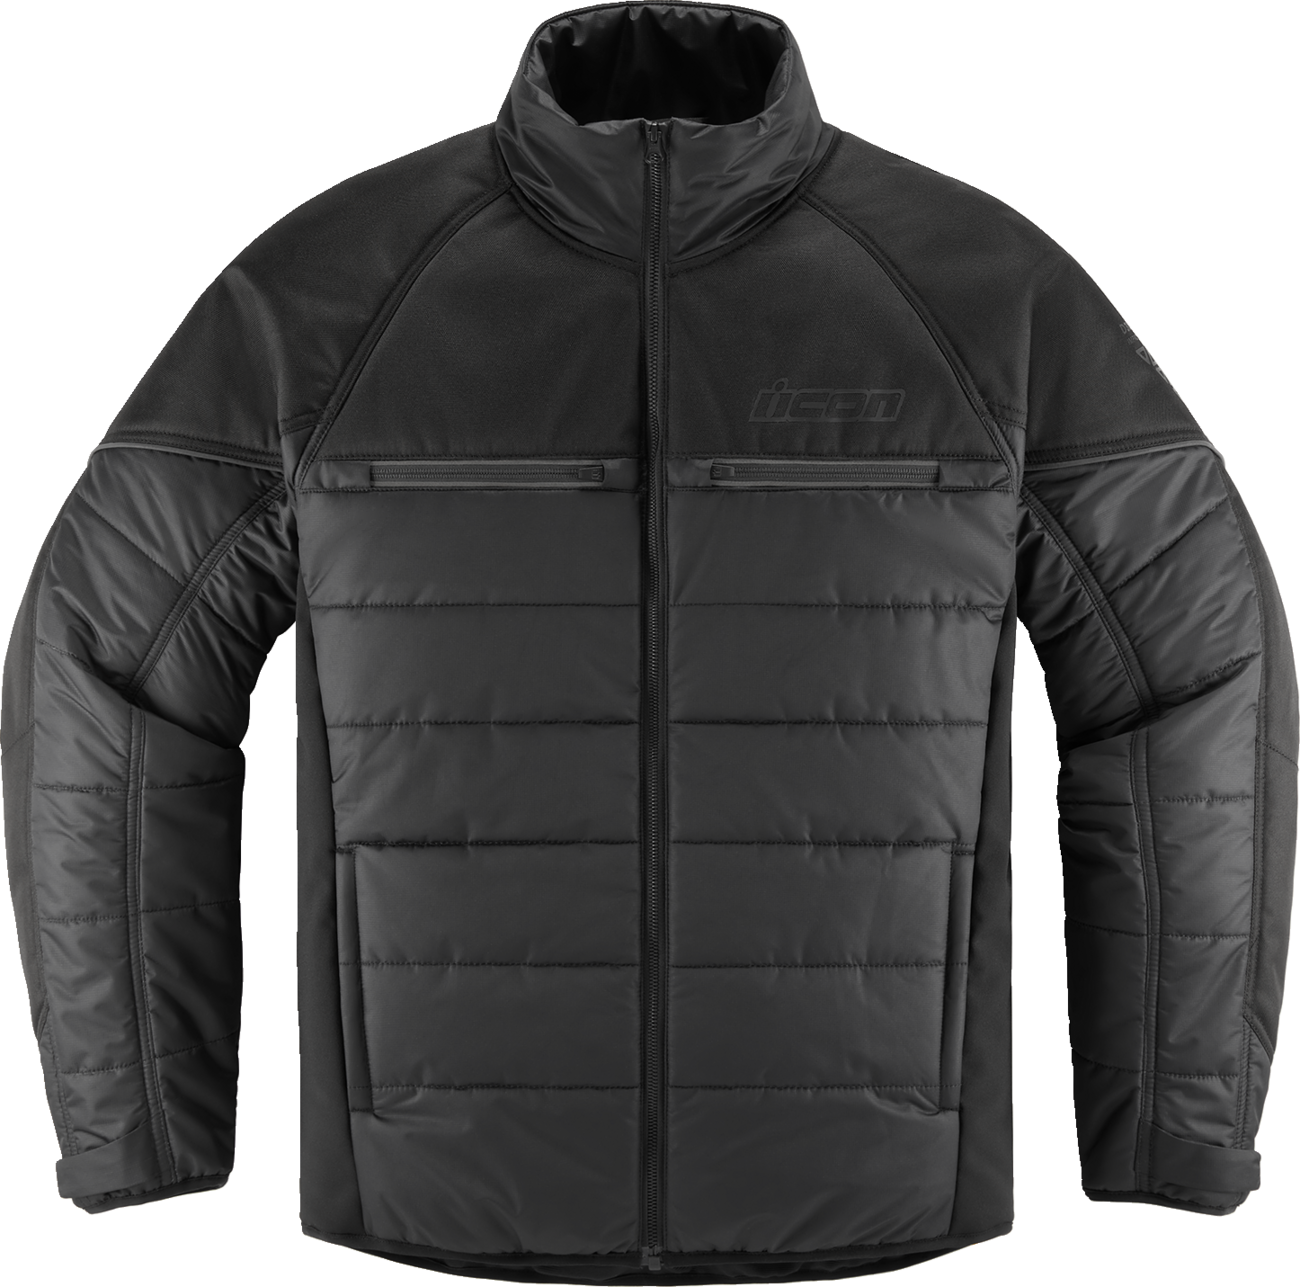 ICON Ghost Puffer Jacket - Black/Charcoal - Large 2820-6192